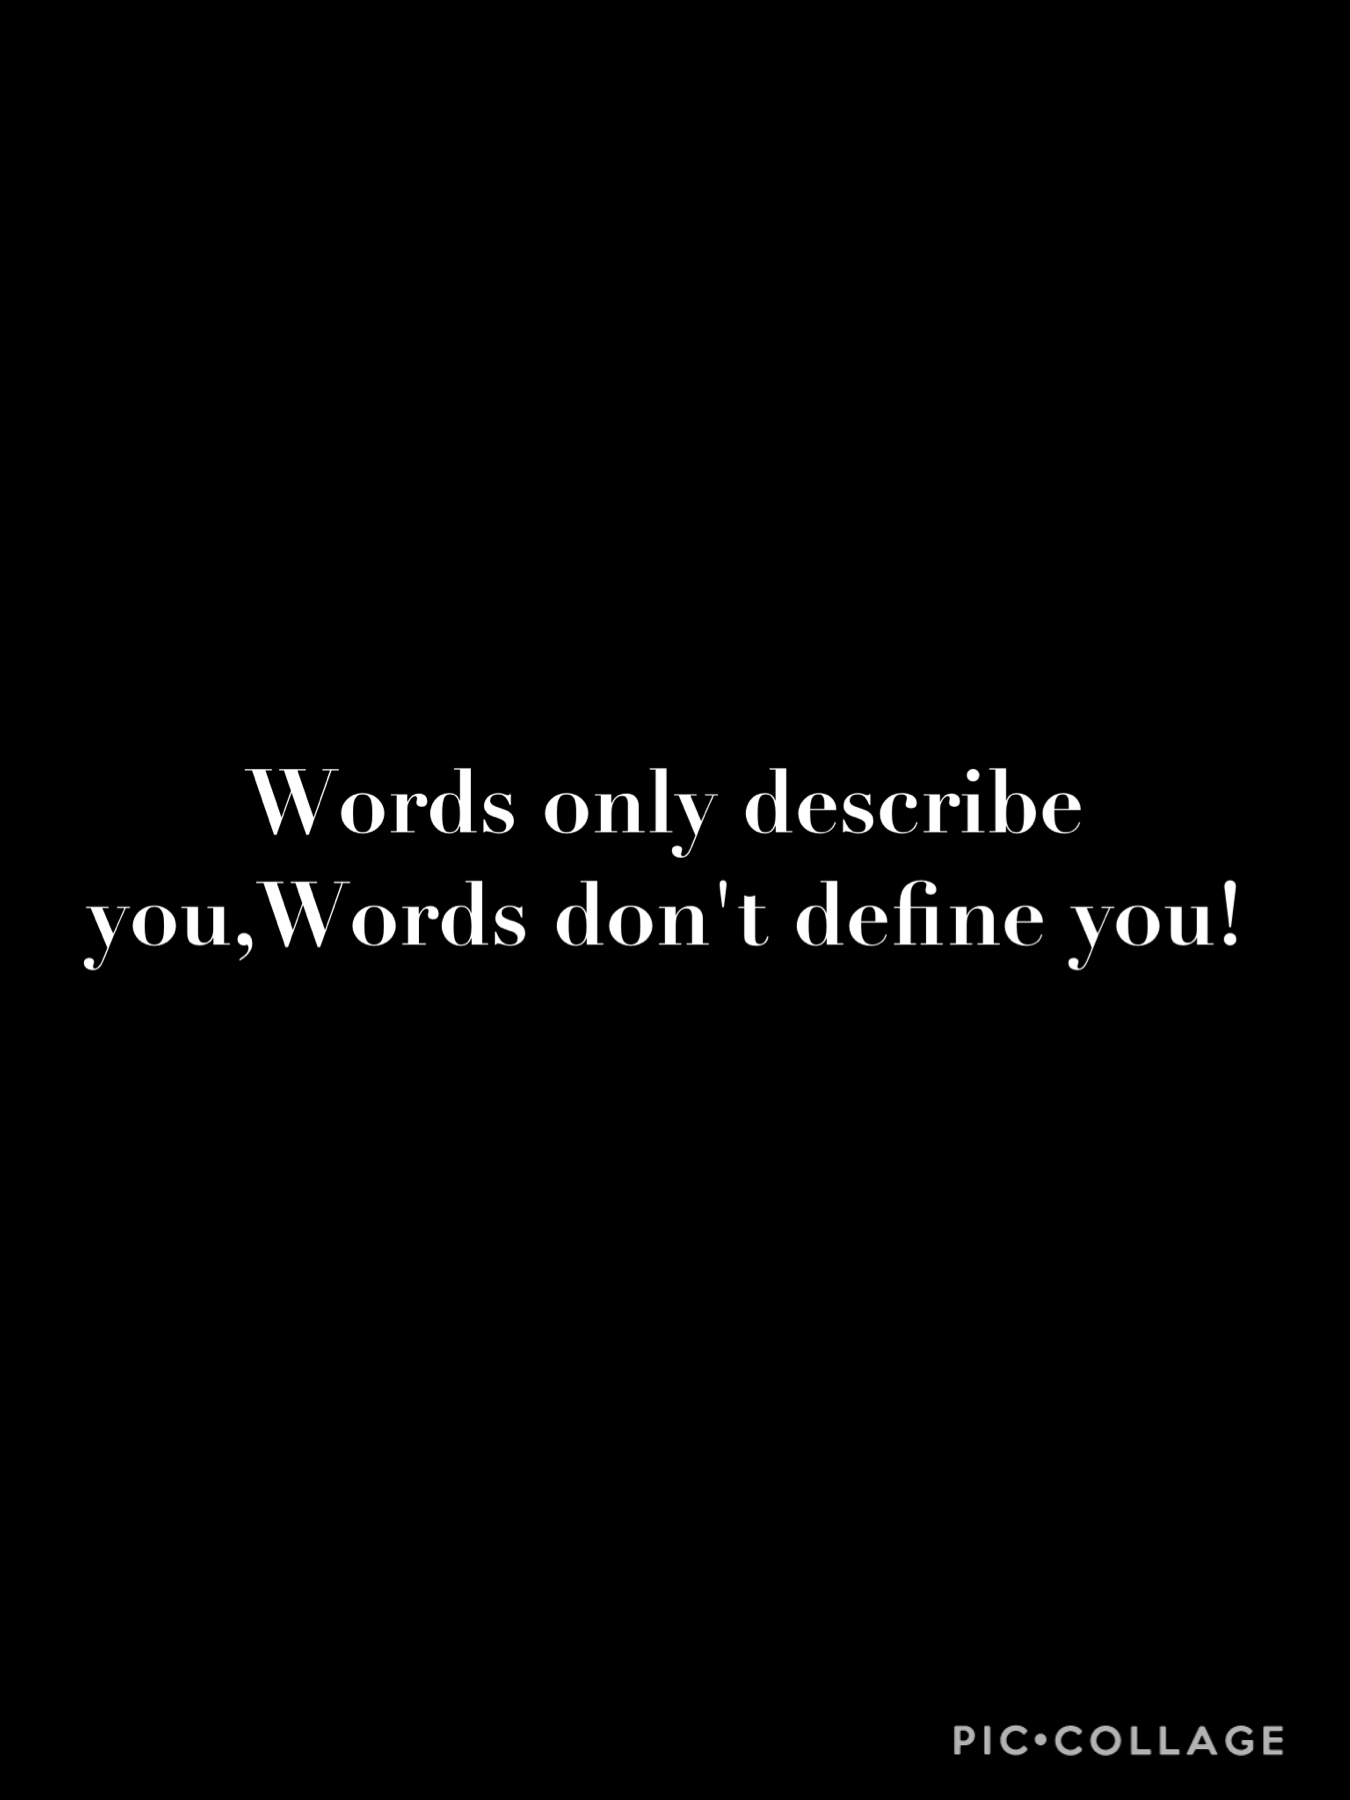 Don’t get hurt when people call you bad words that have nothing to do with you!
05/01/21